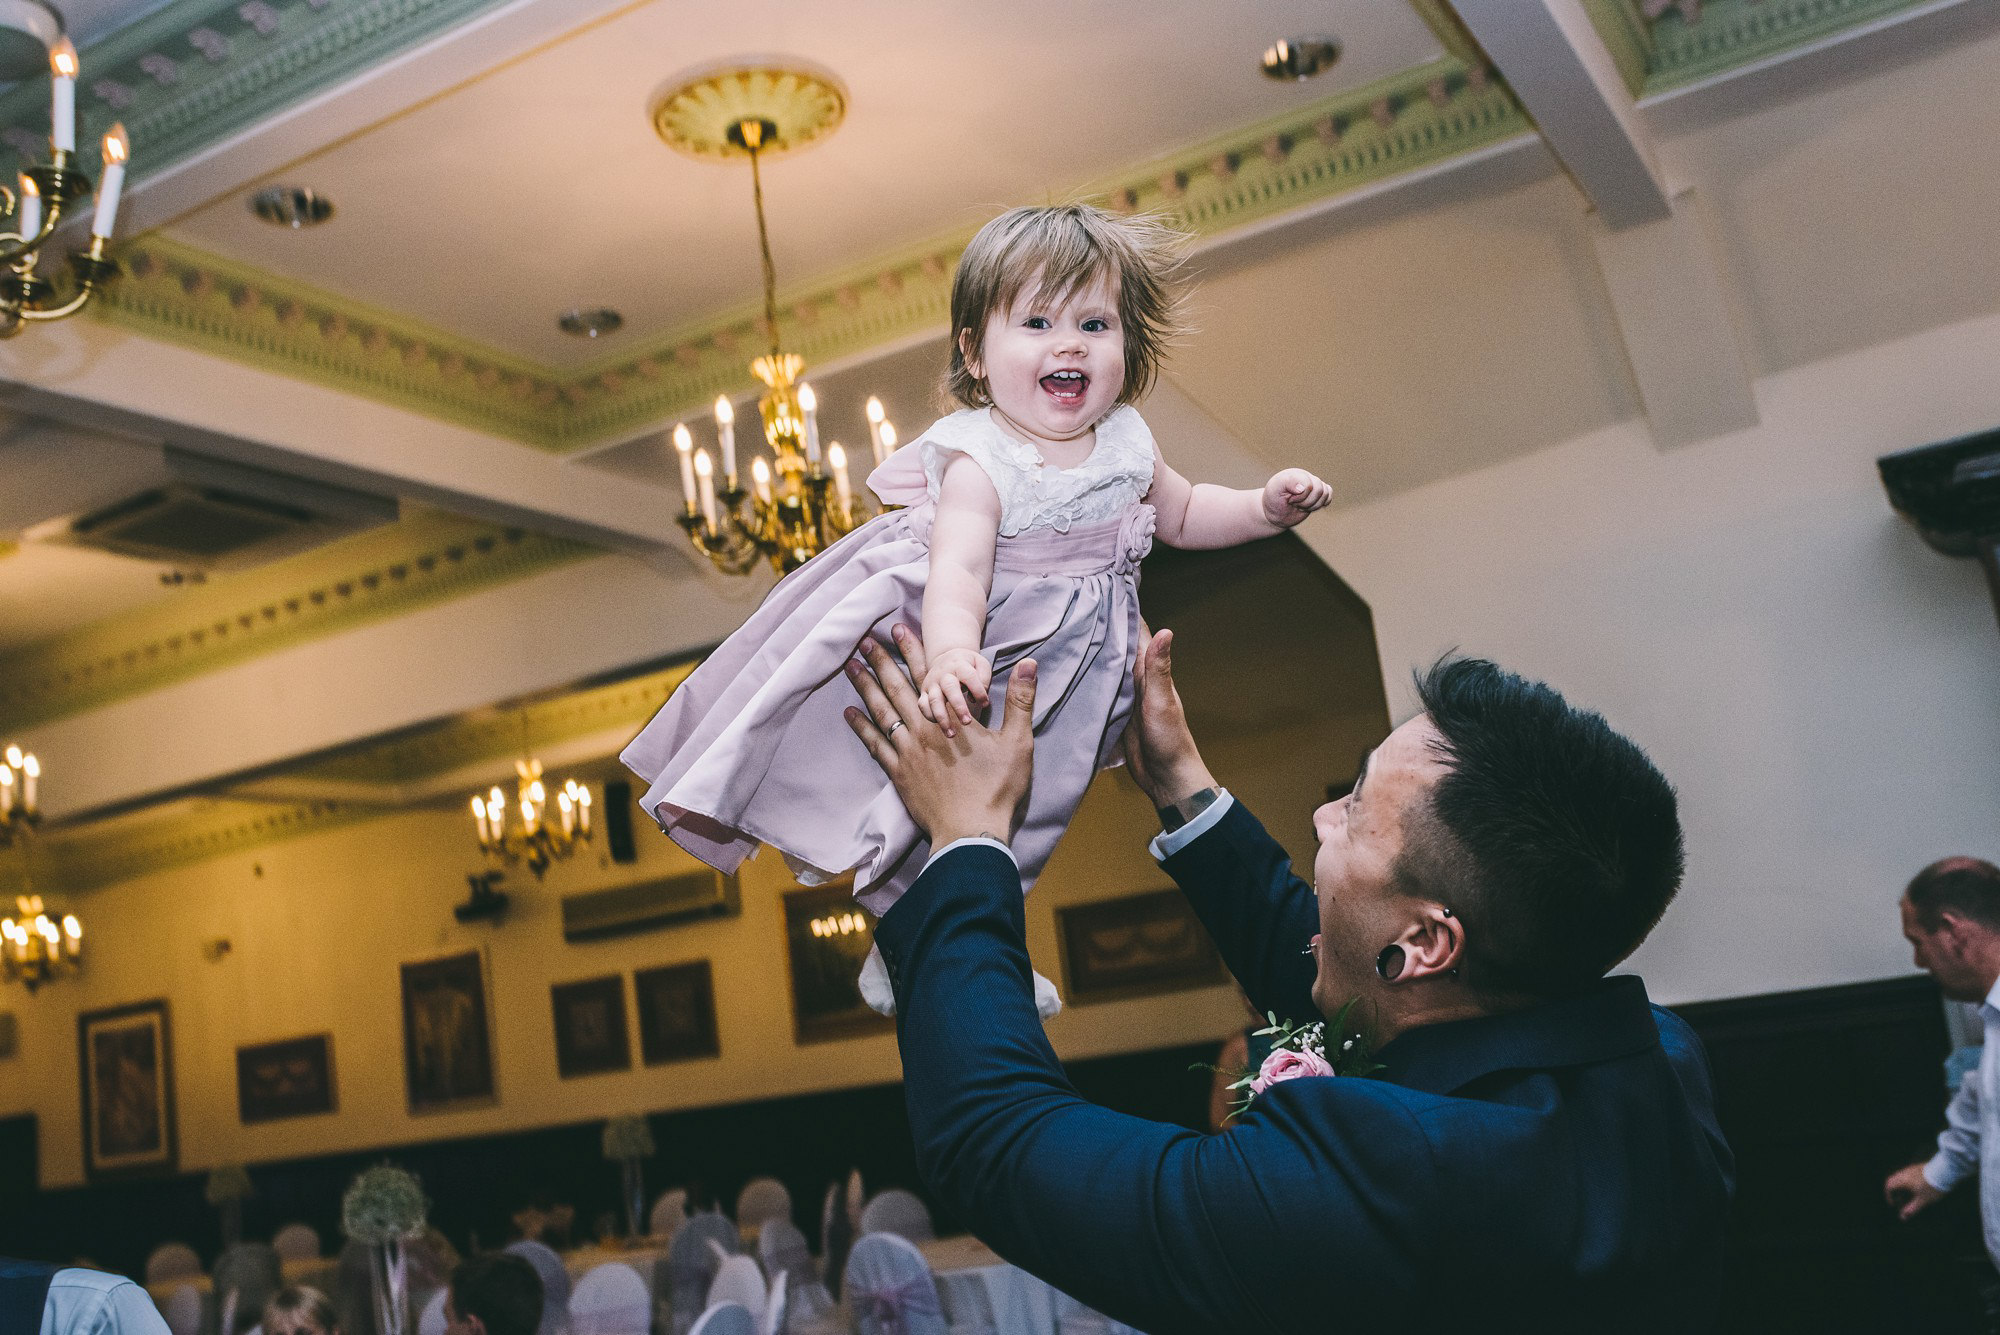 dunston-hall-wedding-in-norwich-james-powell-photography-021